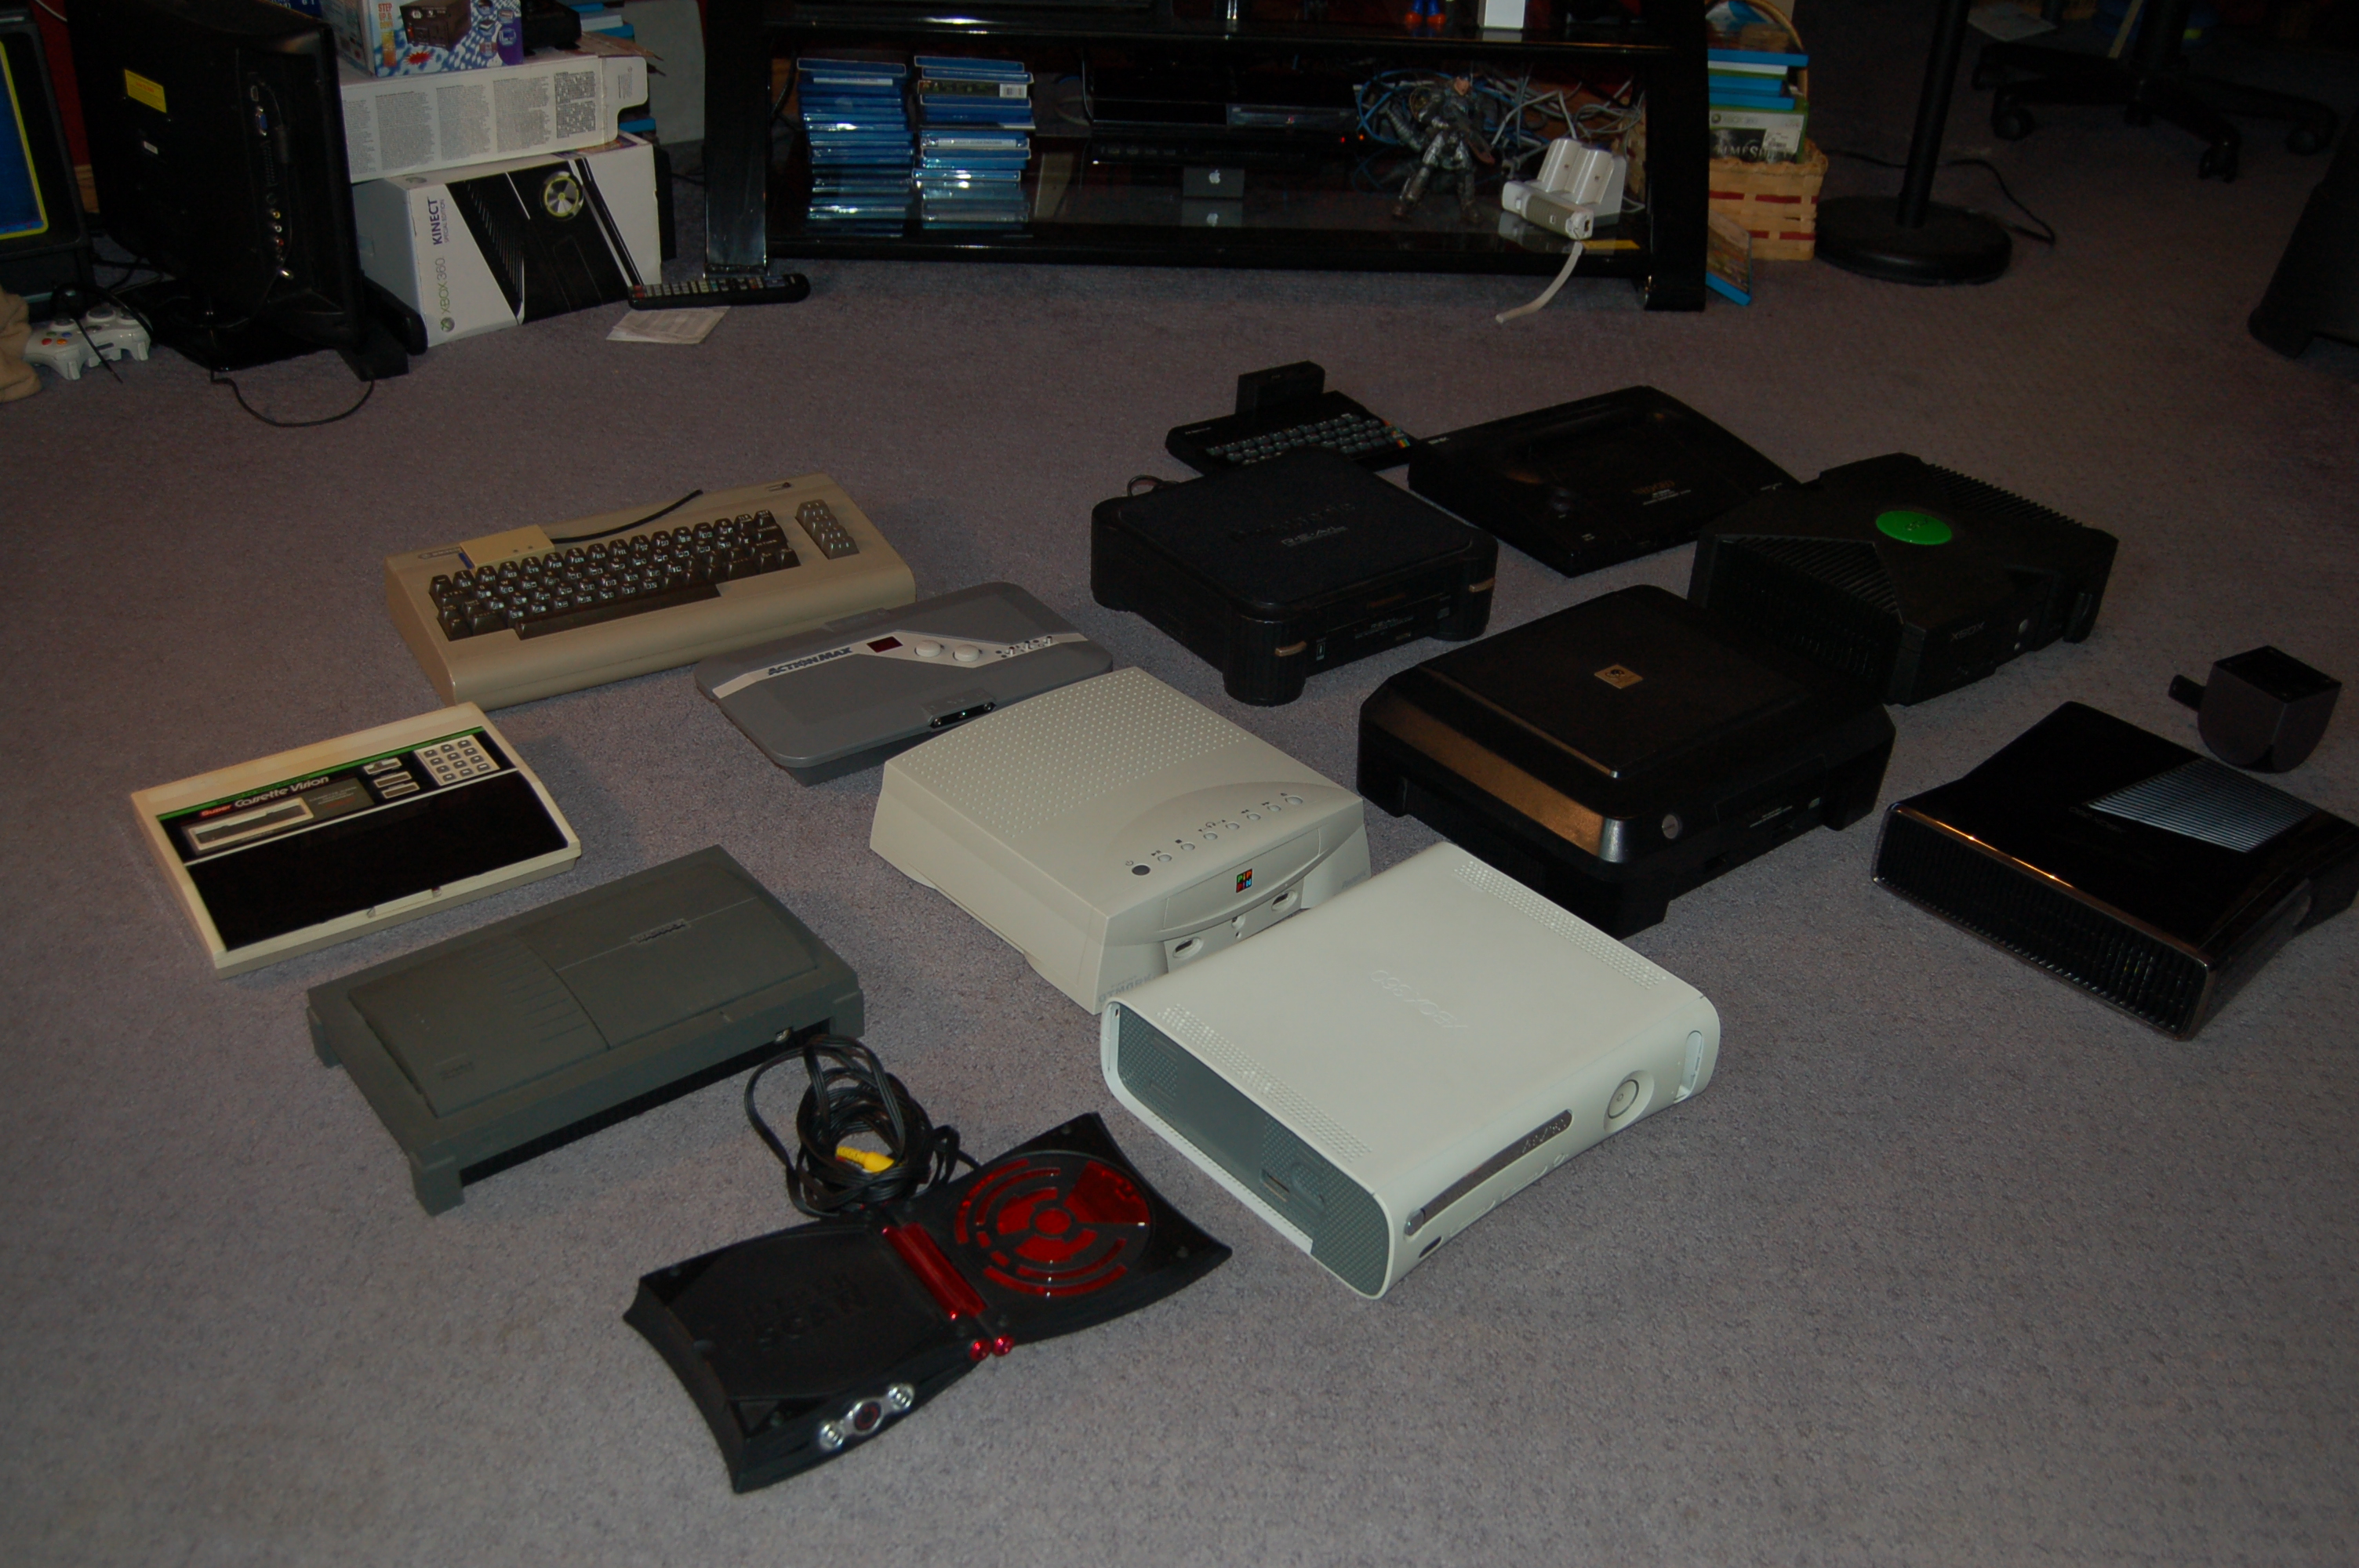 Commodore 64, ZX Spectrum, Super Cassette Vision, Action Max, 3DO, Neo Geo AES, CD-i, Pippin, Neo Geo CD, Xbox, Hyperscan, Xbox 360, Xbox 360 Slim, Ouya